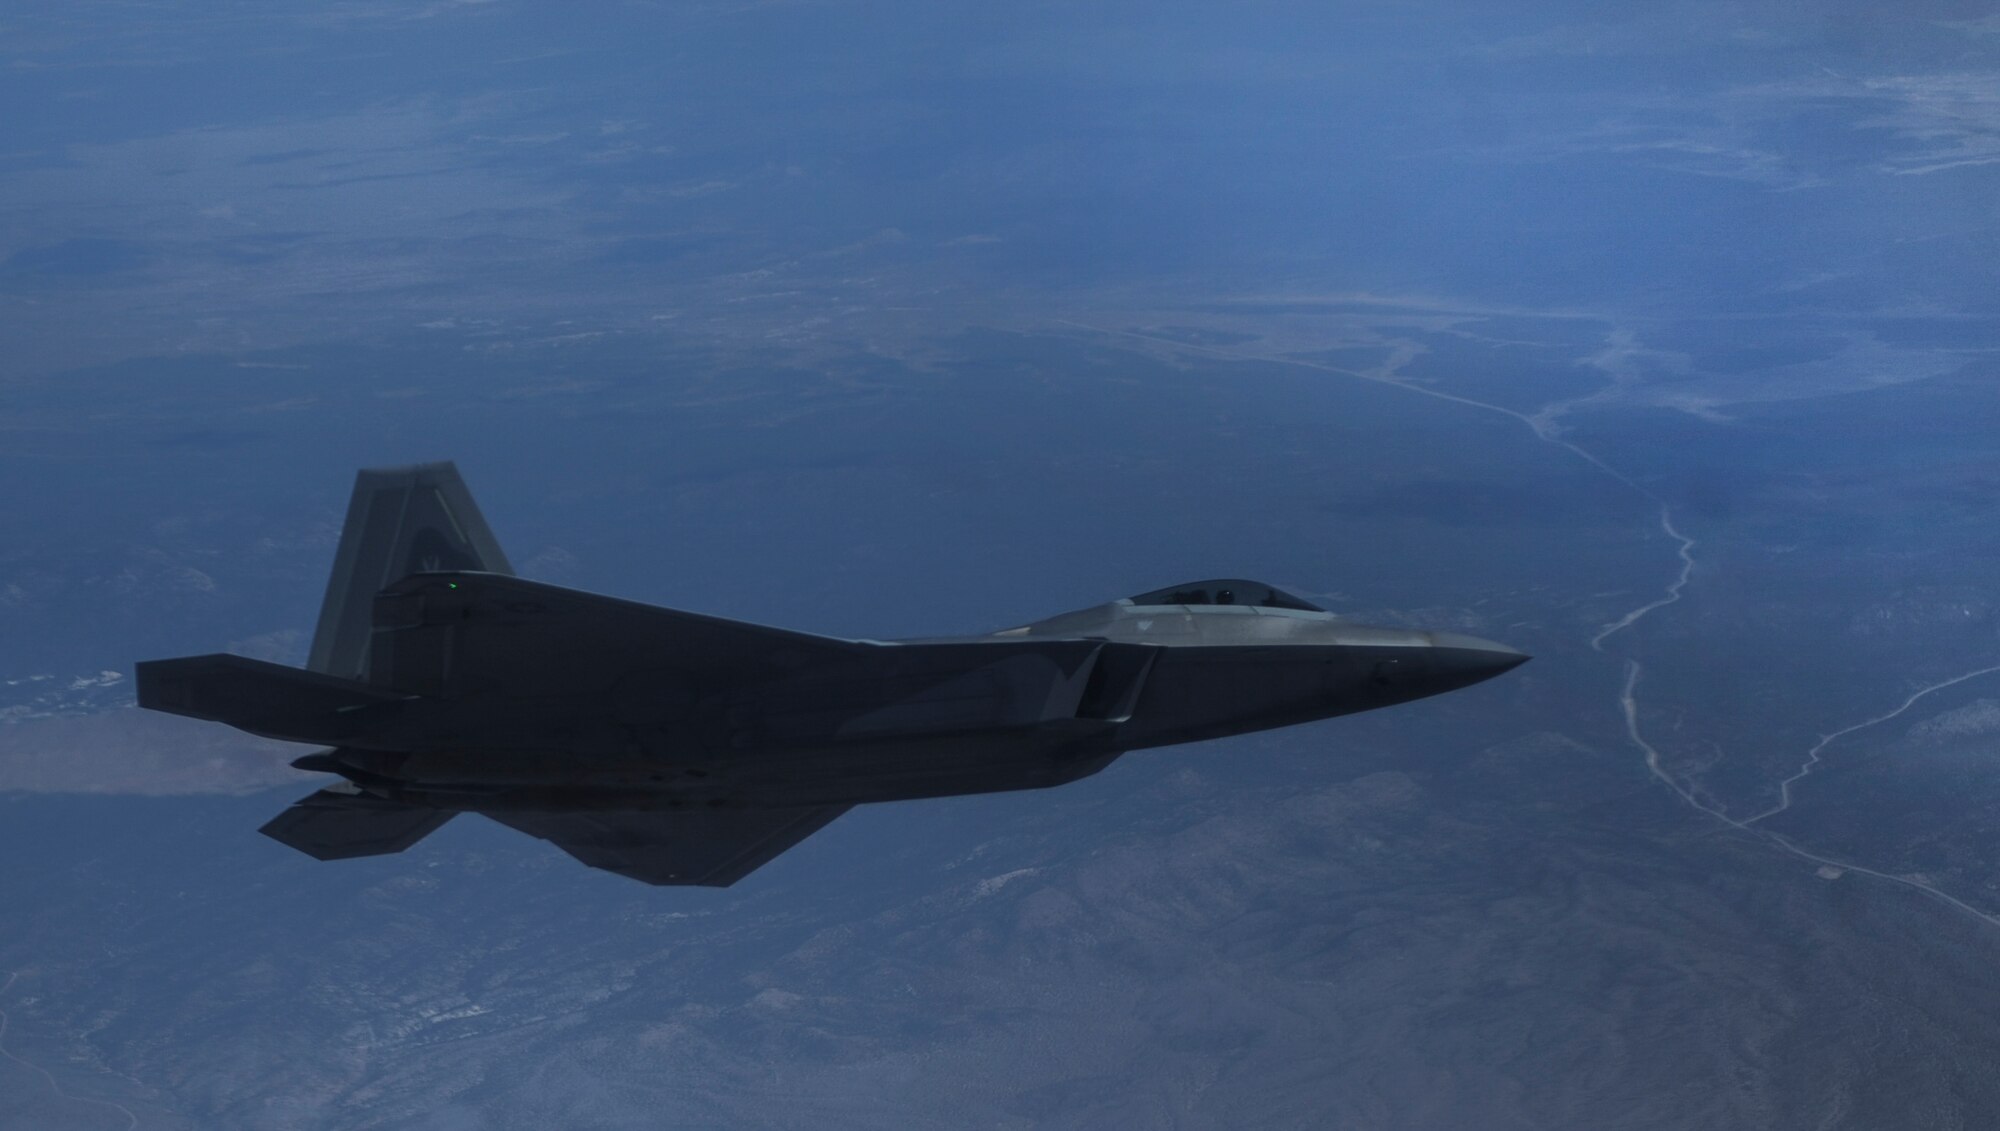 An F-22A Raptor, assigned to the 27th Fighter Squadron, Joint Base Langley-Eustis, Va., banks over the Nevada Test and Training Range, during Red Flag 16-3, July 27, 2016. All four branches of the U.S. Military participate in the Red Flag training conducted on the vast bombing and gunnery ranges of the Nevada Test and Training Range. (U.S. Air Force photo by Airman 1st Class Kevin Tanenbaum/Released)